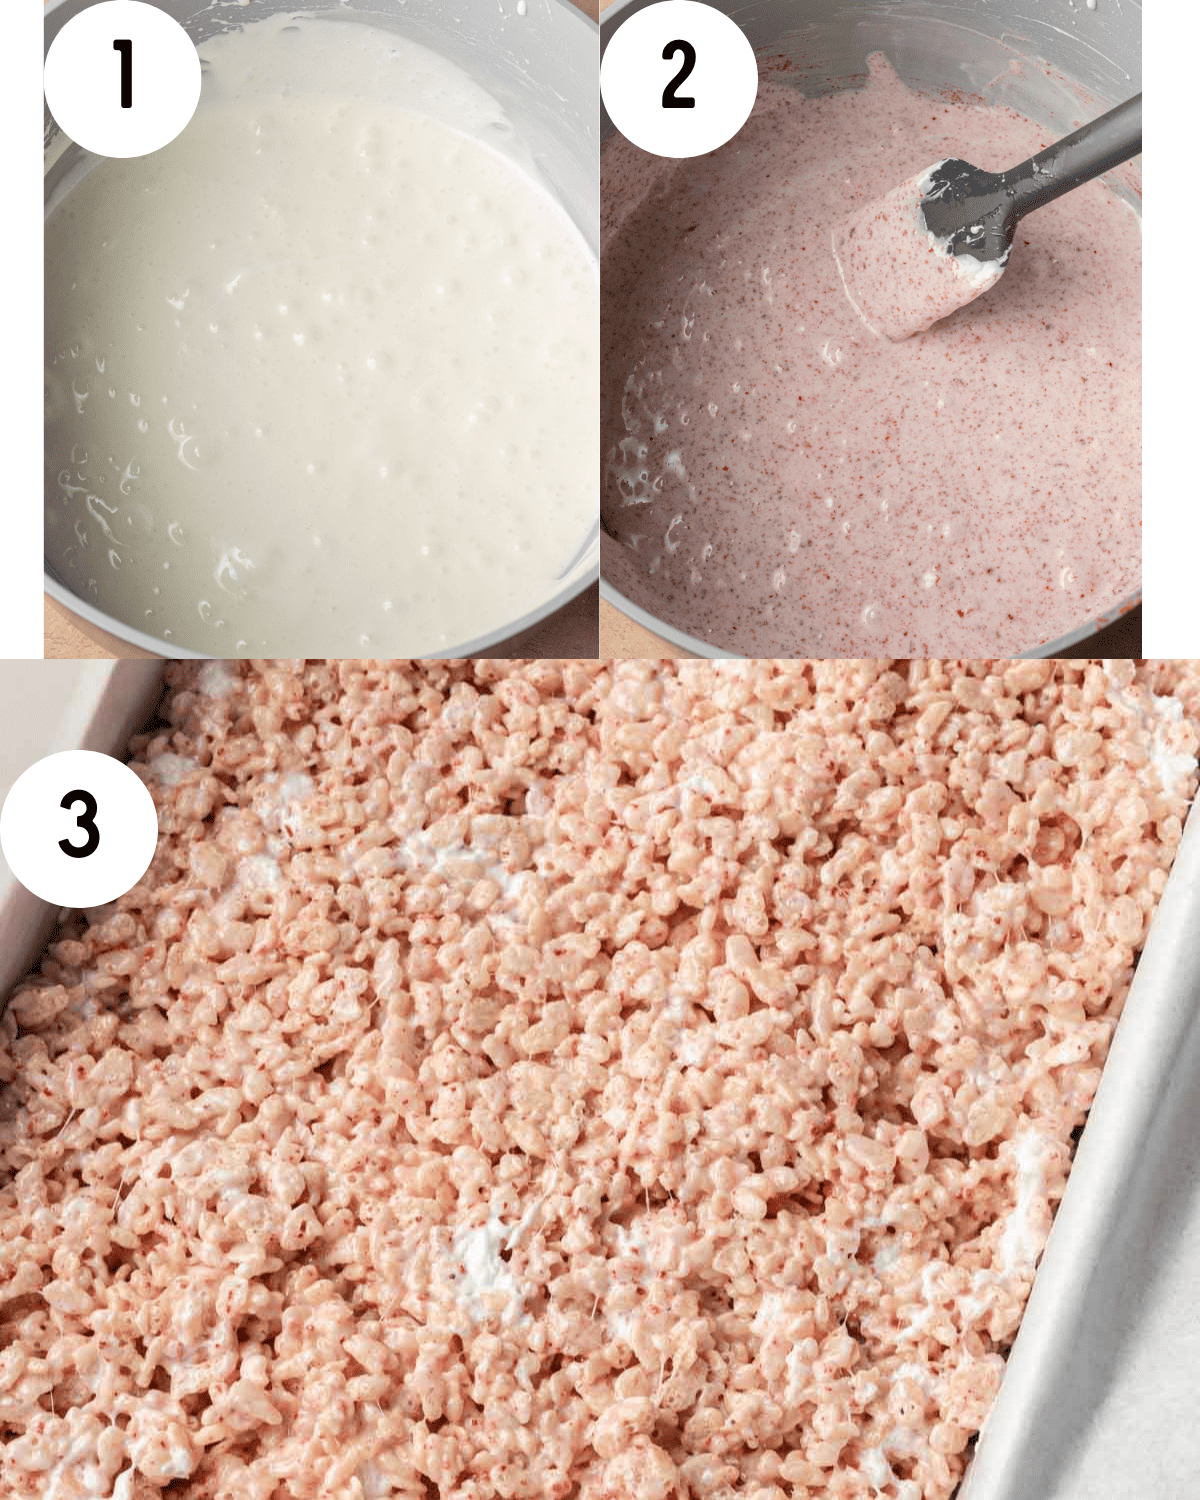 How to make strawberry rice krispie treats. 1. Mix liquid ingredients in mixing bowl. 2. Add in freezer dried strawberries to liquid ingredients in mixing bowl. 3. Combine liquid with rice krispies and fold into a baking sheet.